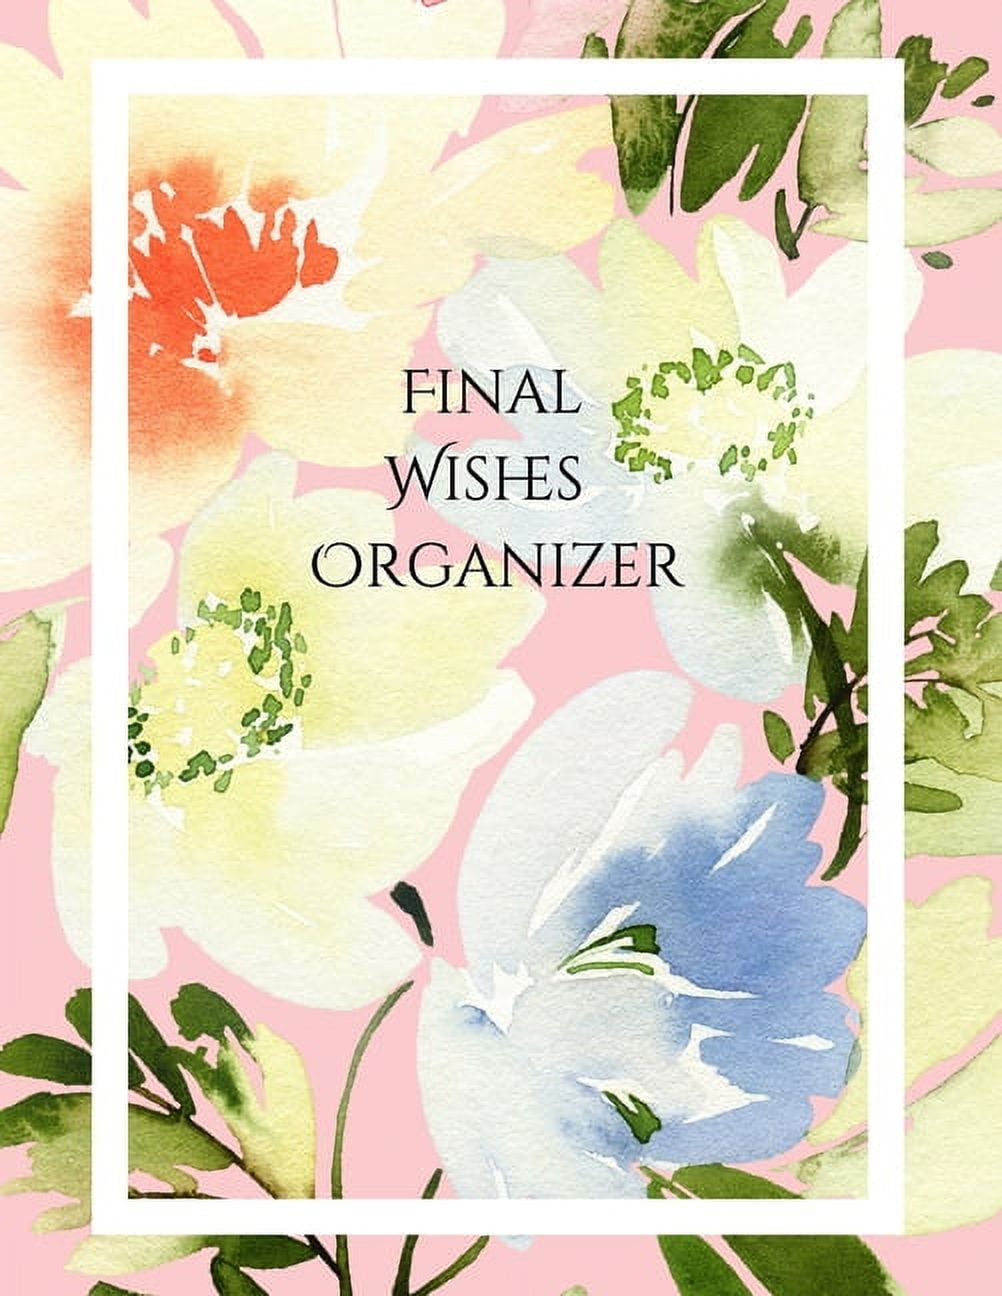 Printable End of Life Planner, Final Wishes Plan, Funeral, Death,  Beneficiary Info and Estate Planning, Written Will, When I Die Digital PDF